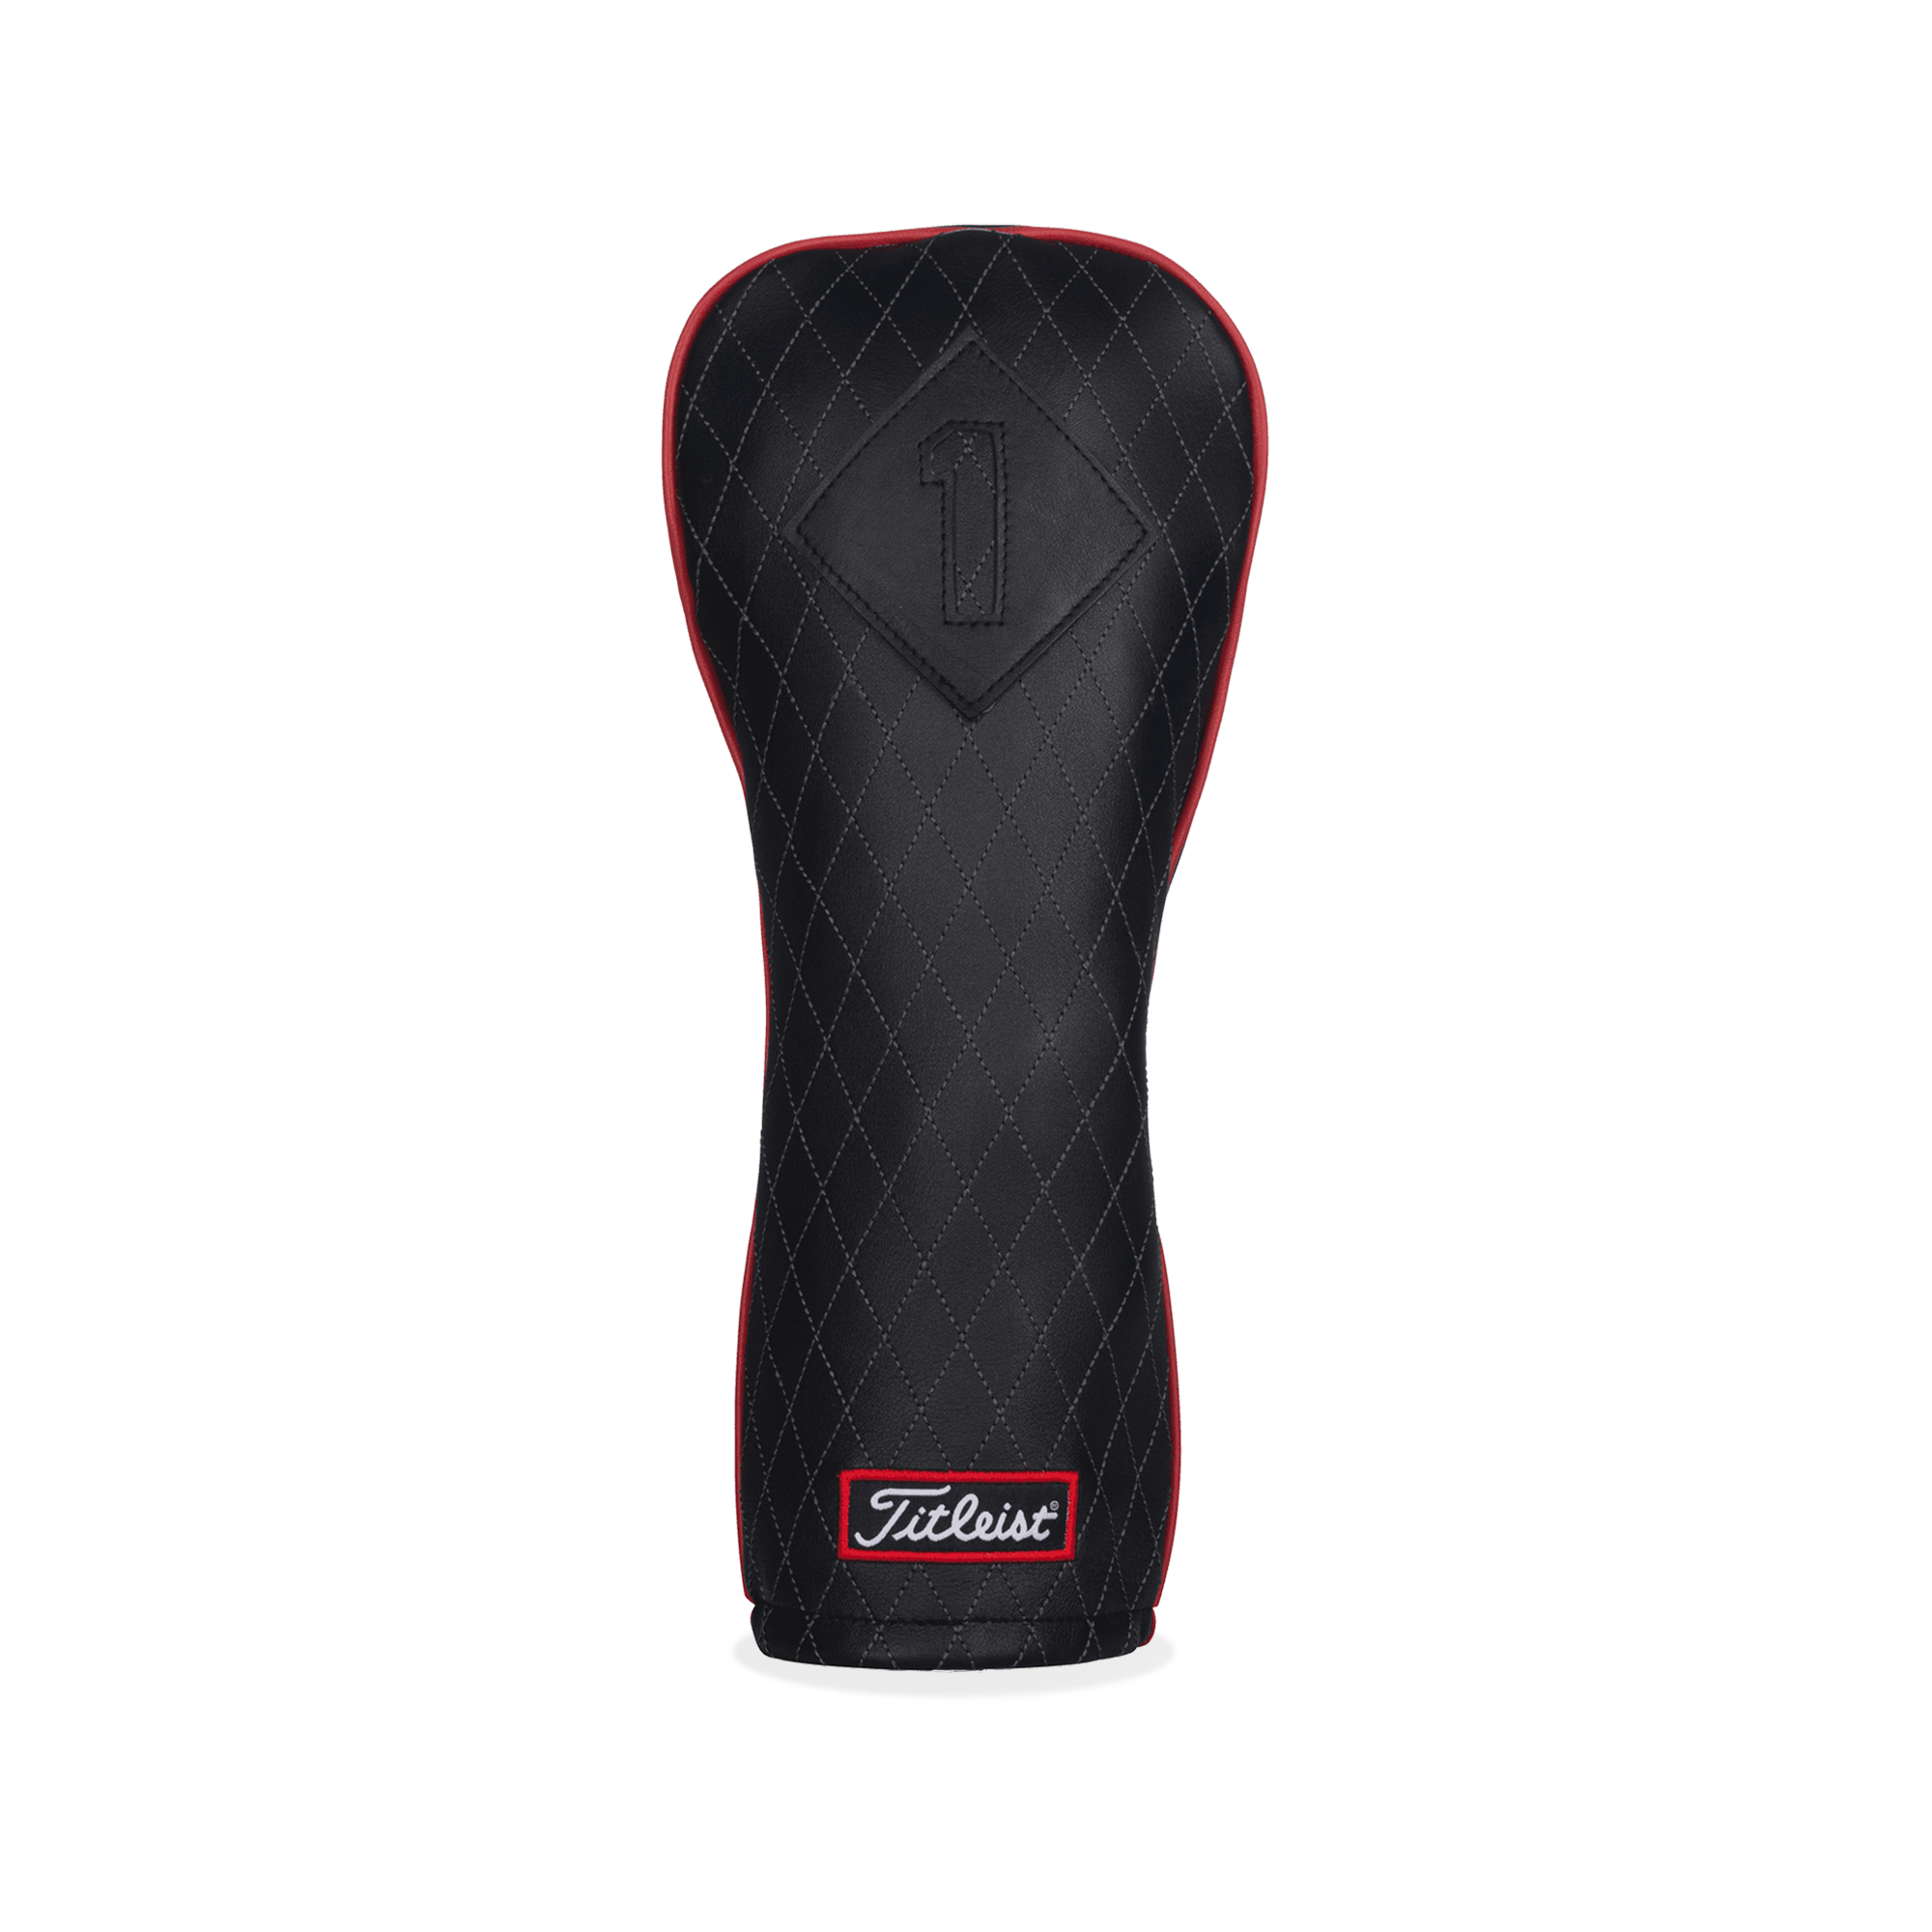 Titleist Official Jet Black Leather Headcover in Black/Black/Red